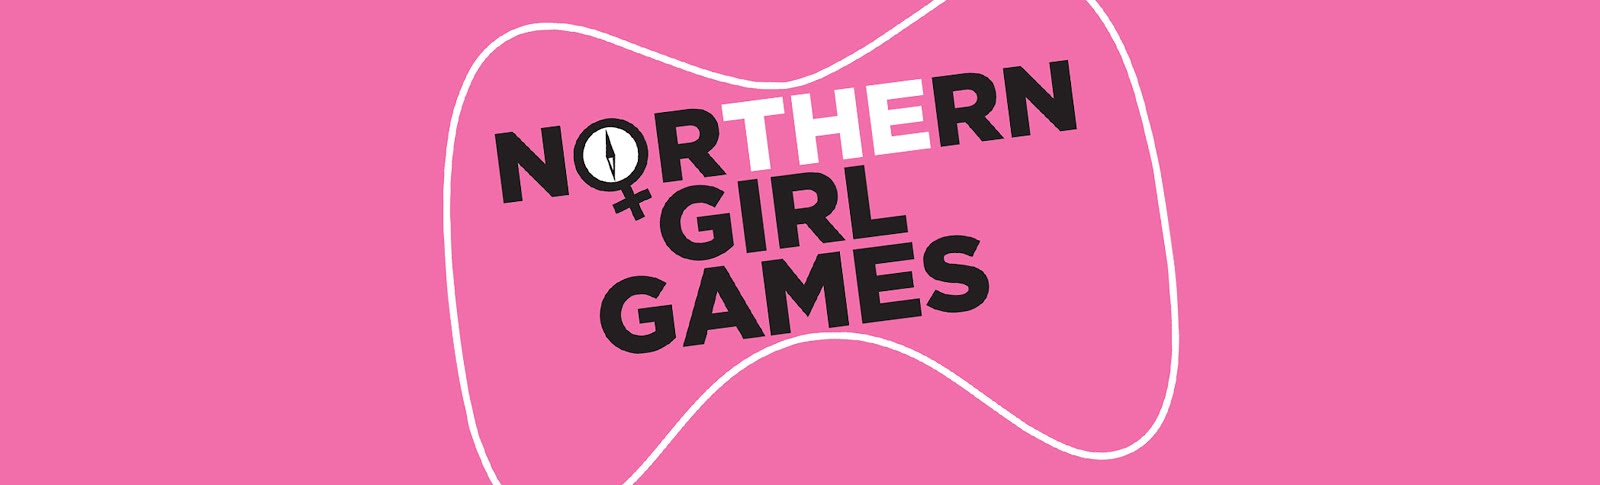 TheNorthernGirl Games